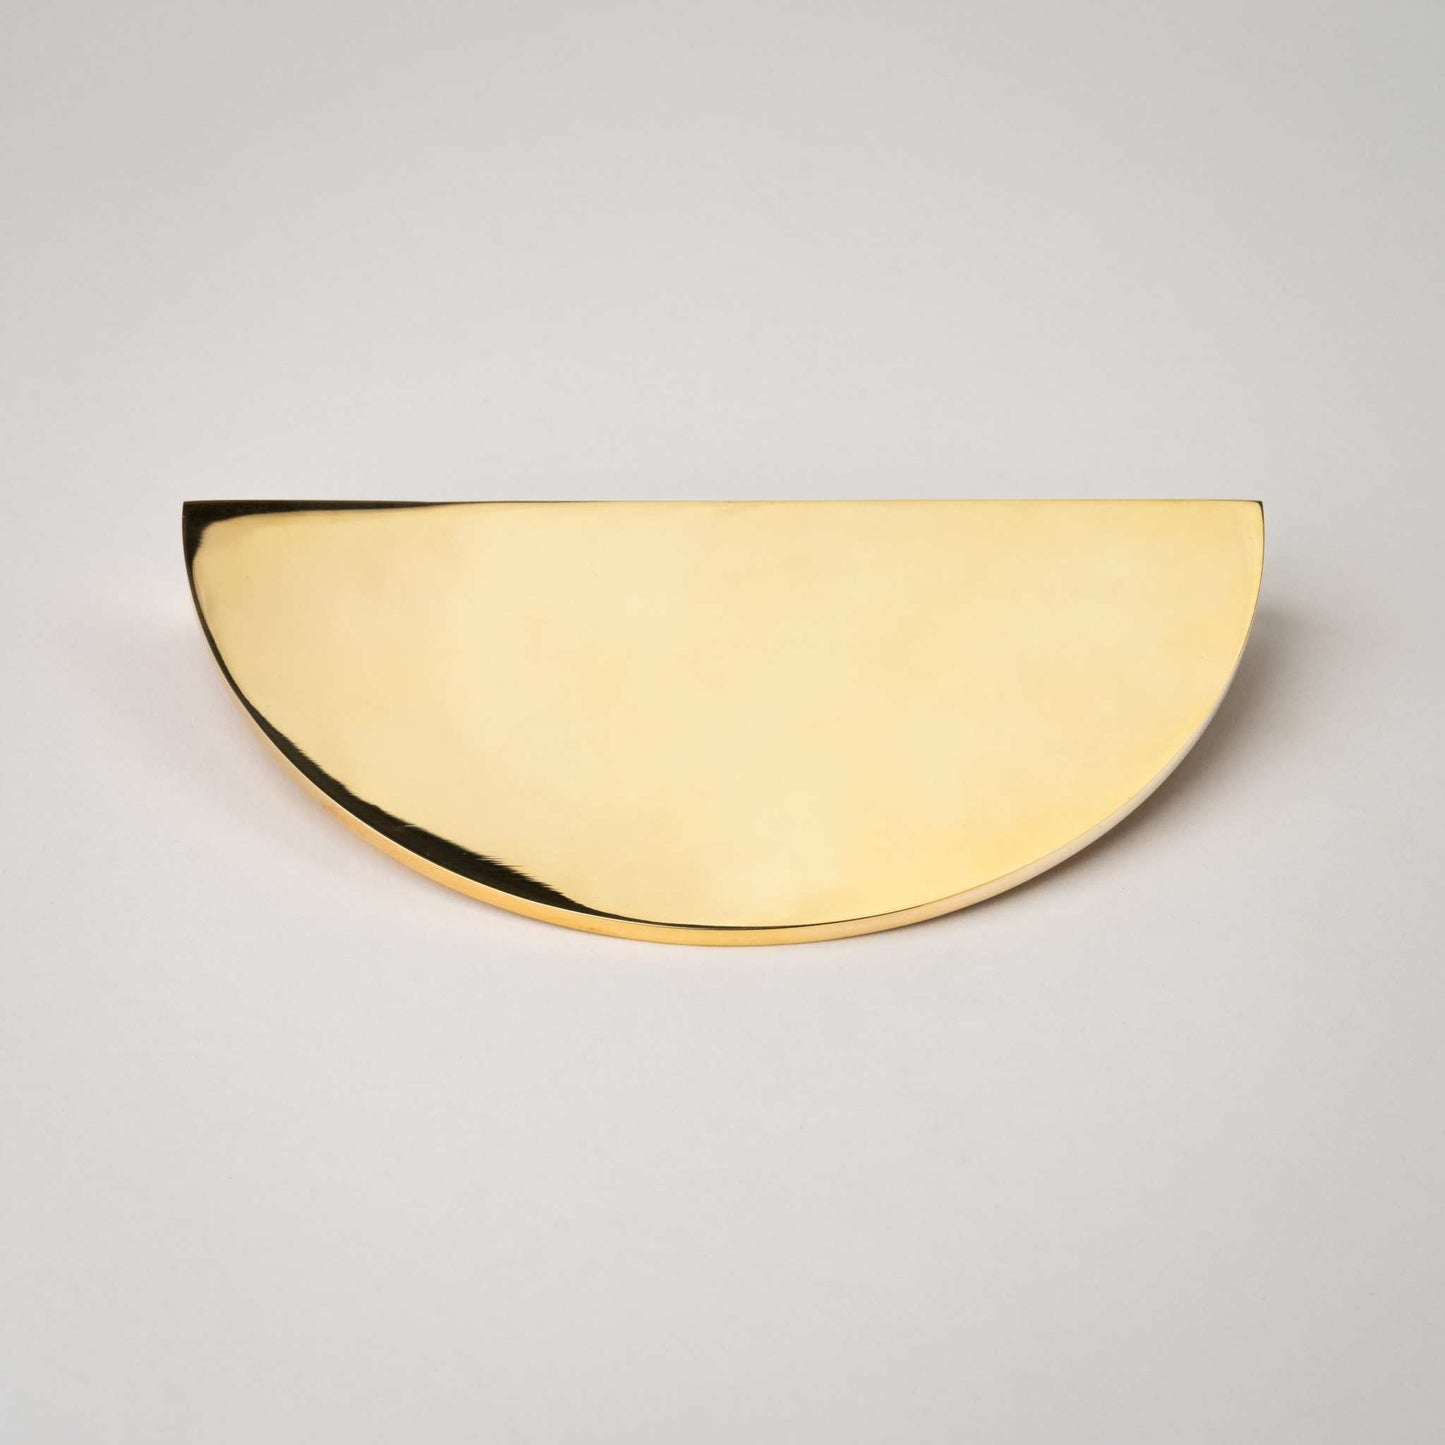 Demi Lune, Solid Brass Half Moon Cabinet PullsOur handmade Demi Lune cabinet handle is designed to be mounted in pairs to form a full circle or mounted horizontally as a half moon. In either orientation, it exudpullDemi Lune, Solid Brass Half Moon Pulls